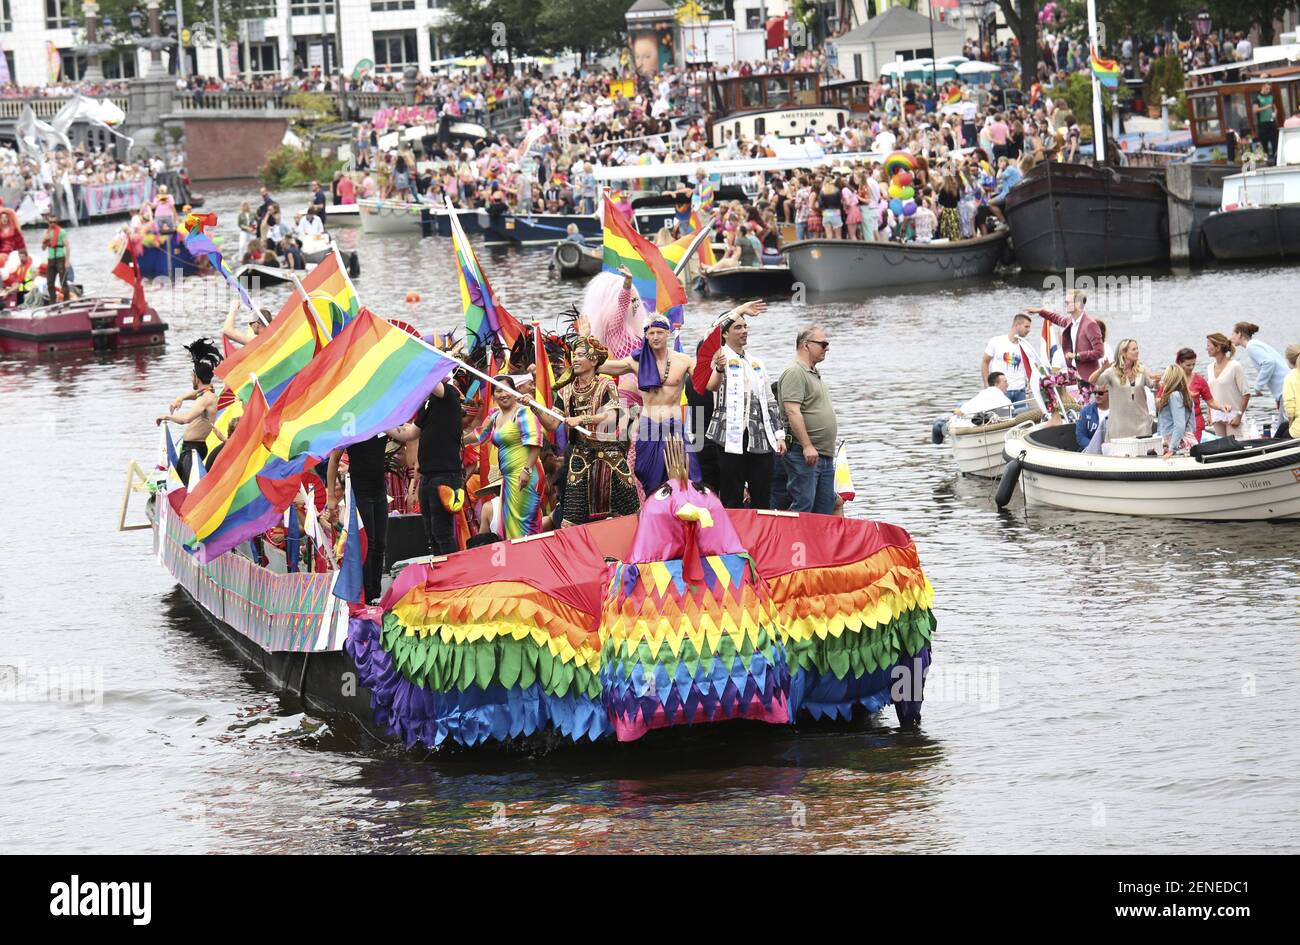 People participate in the Amsterdam Canal Parade during Amsterdam Gay Pride 2019 in Amsterdam, The Netherlands on August 5, 2019. (Photo by PPE/Beijersbergen/Sipa USA) Stock Photo